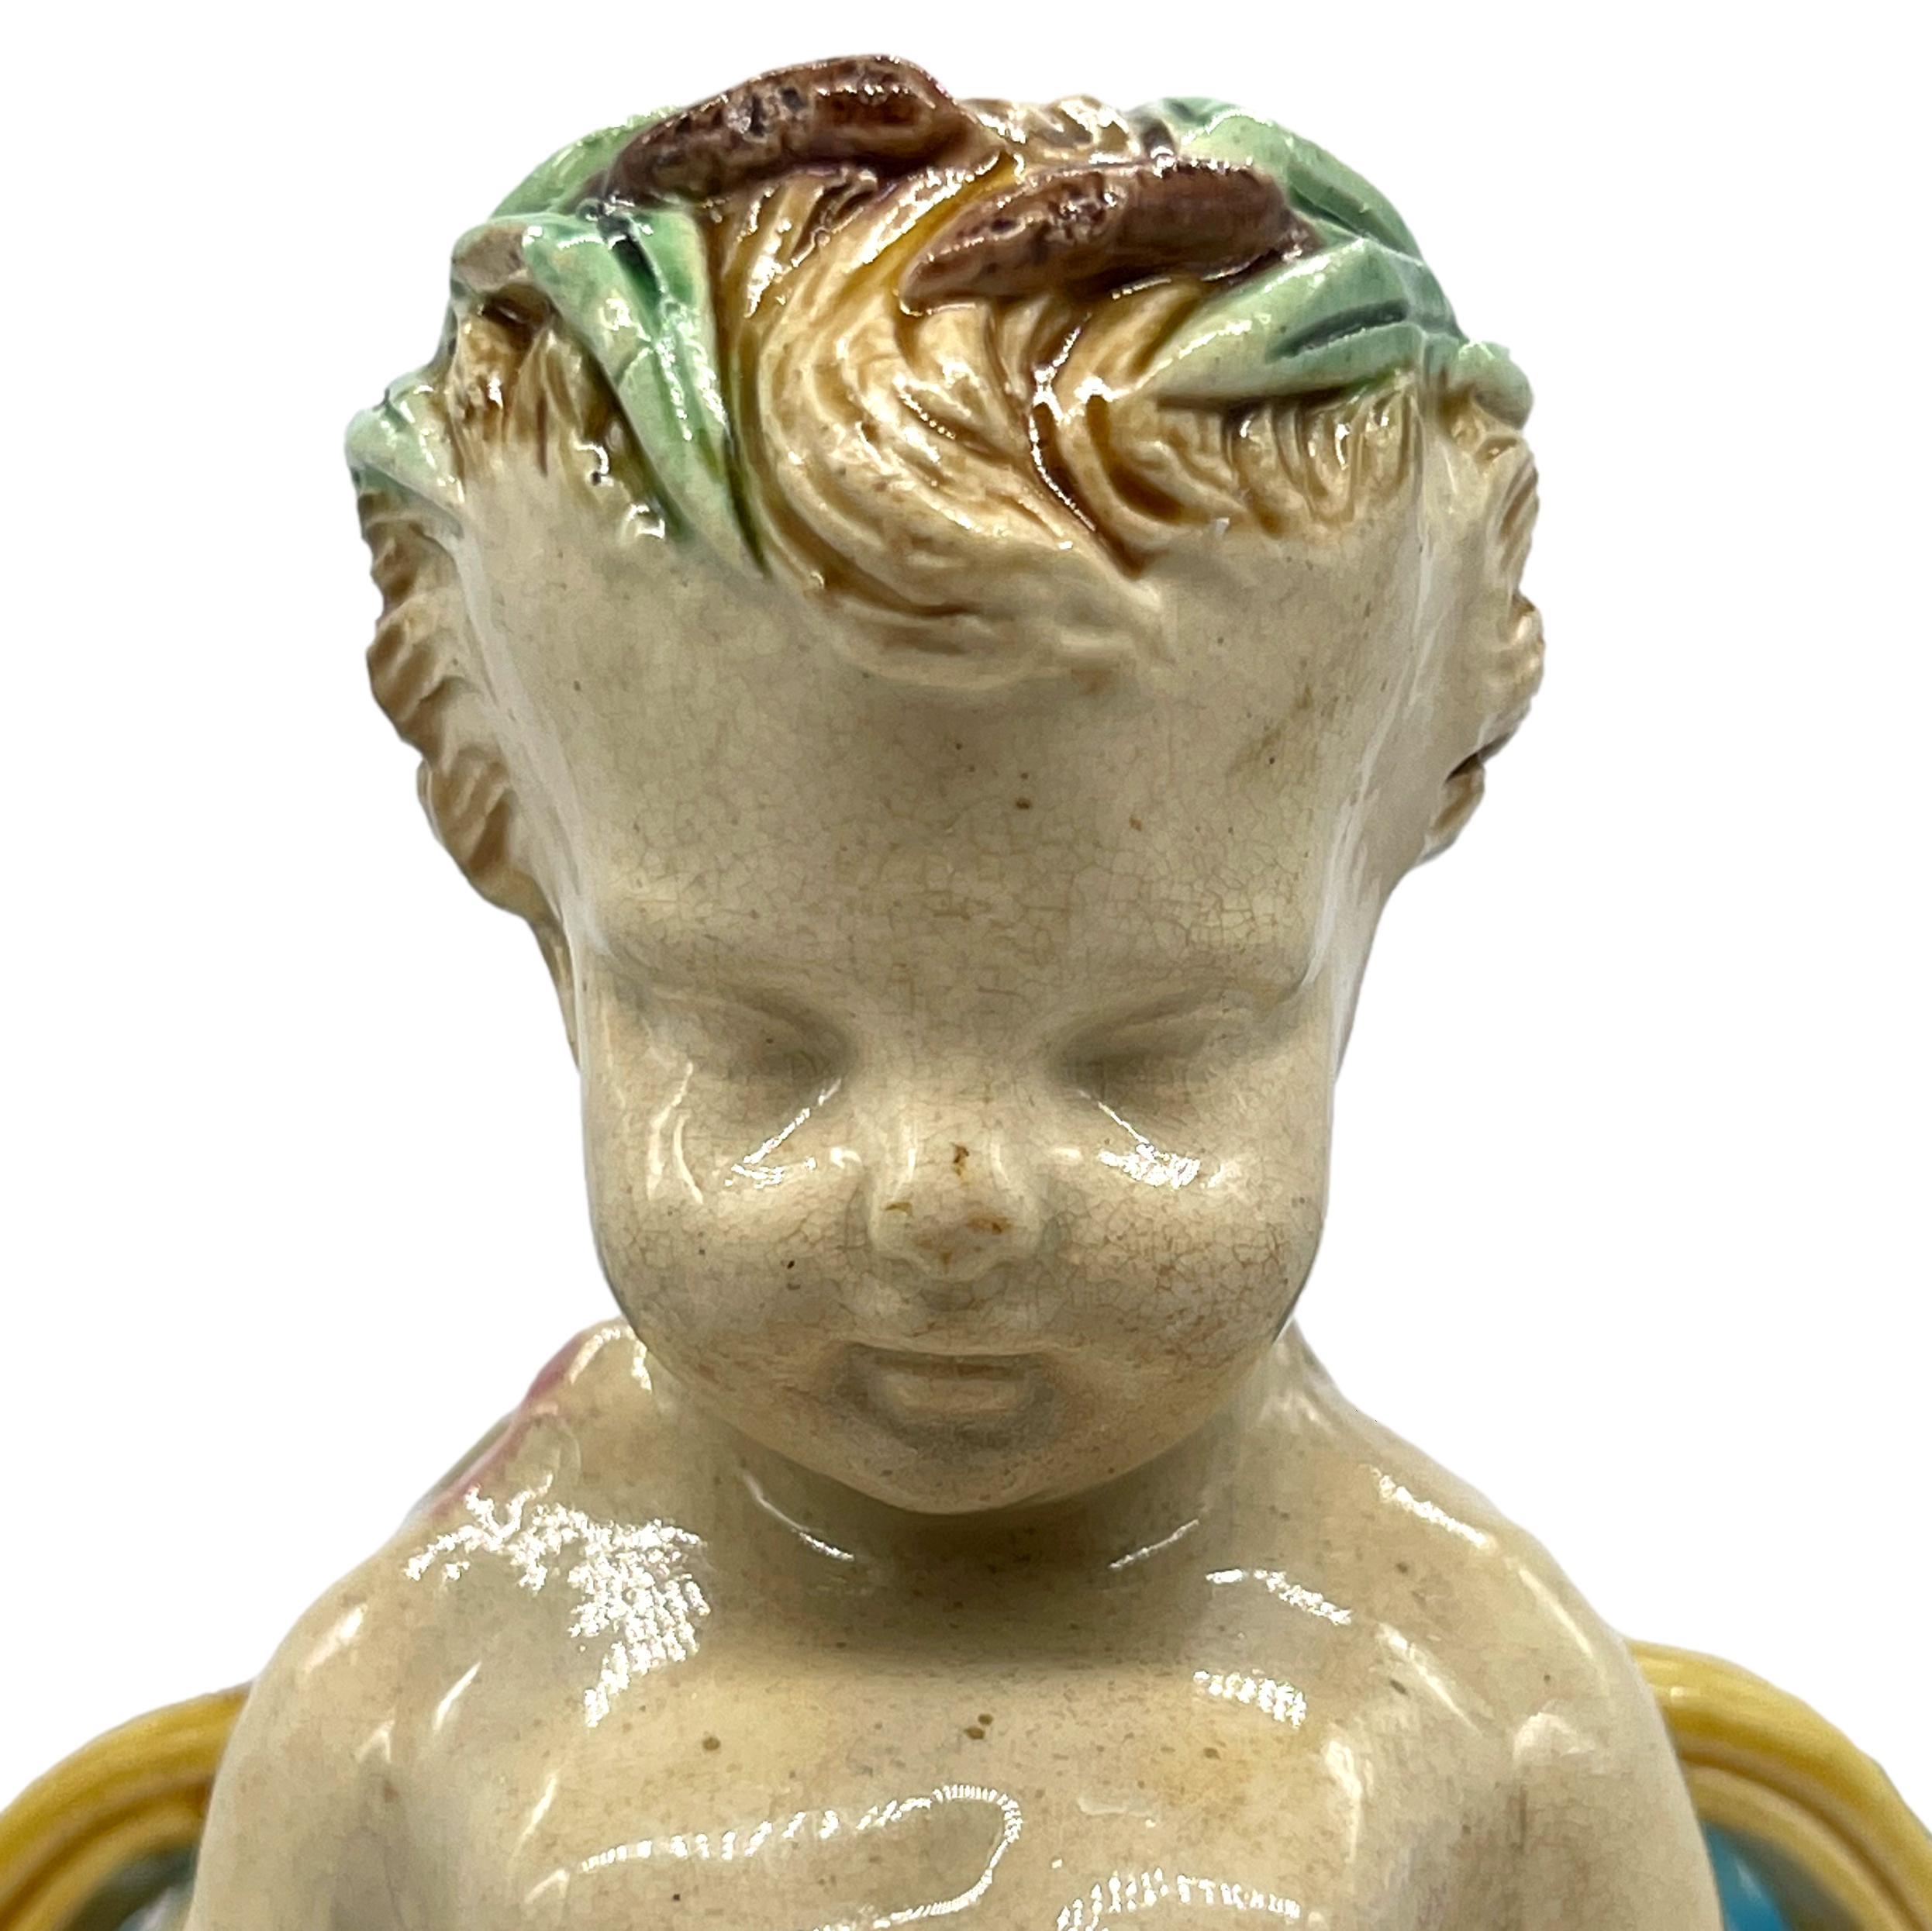 Minton Majolica Faun Reticulated Basket by A. Carrier-Belleuse, Dated 1871 1